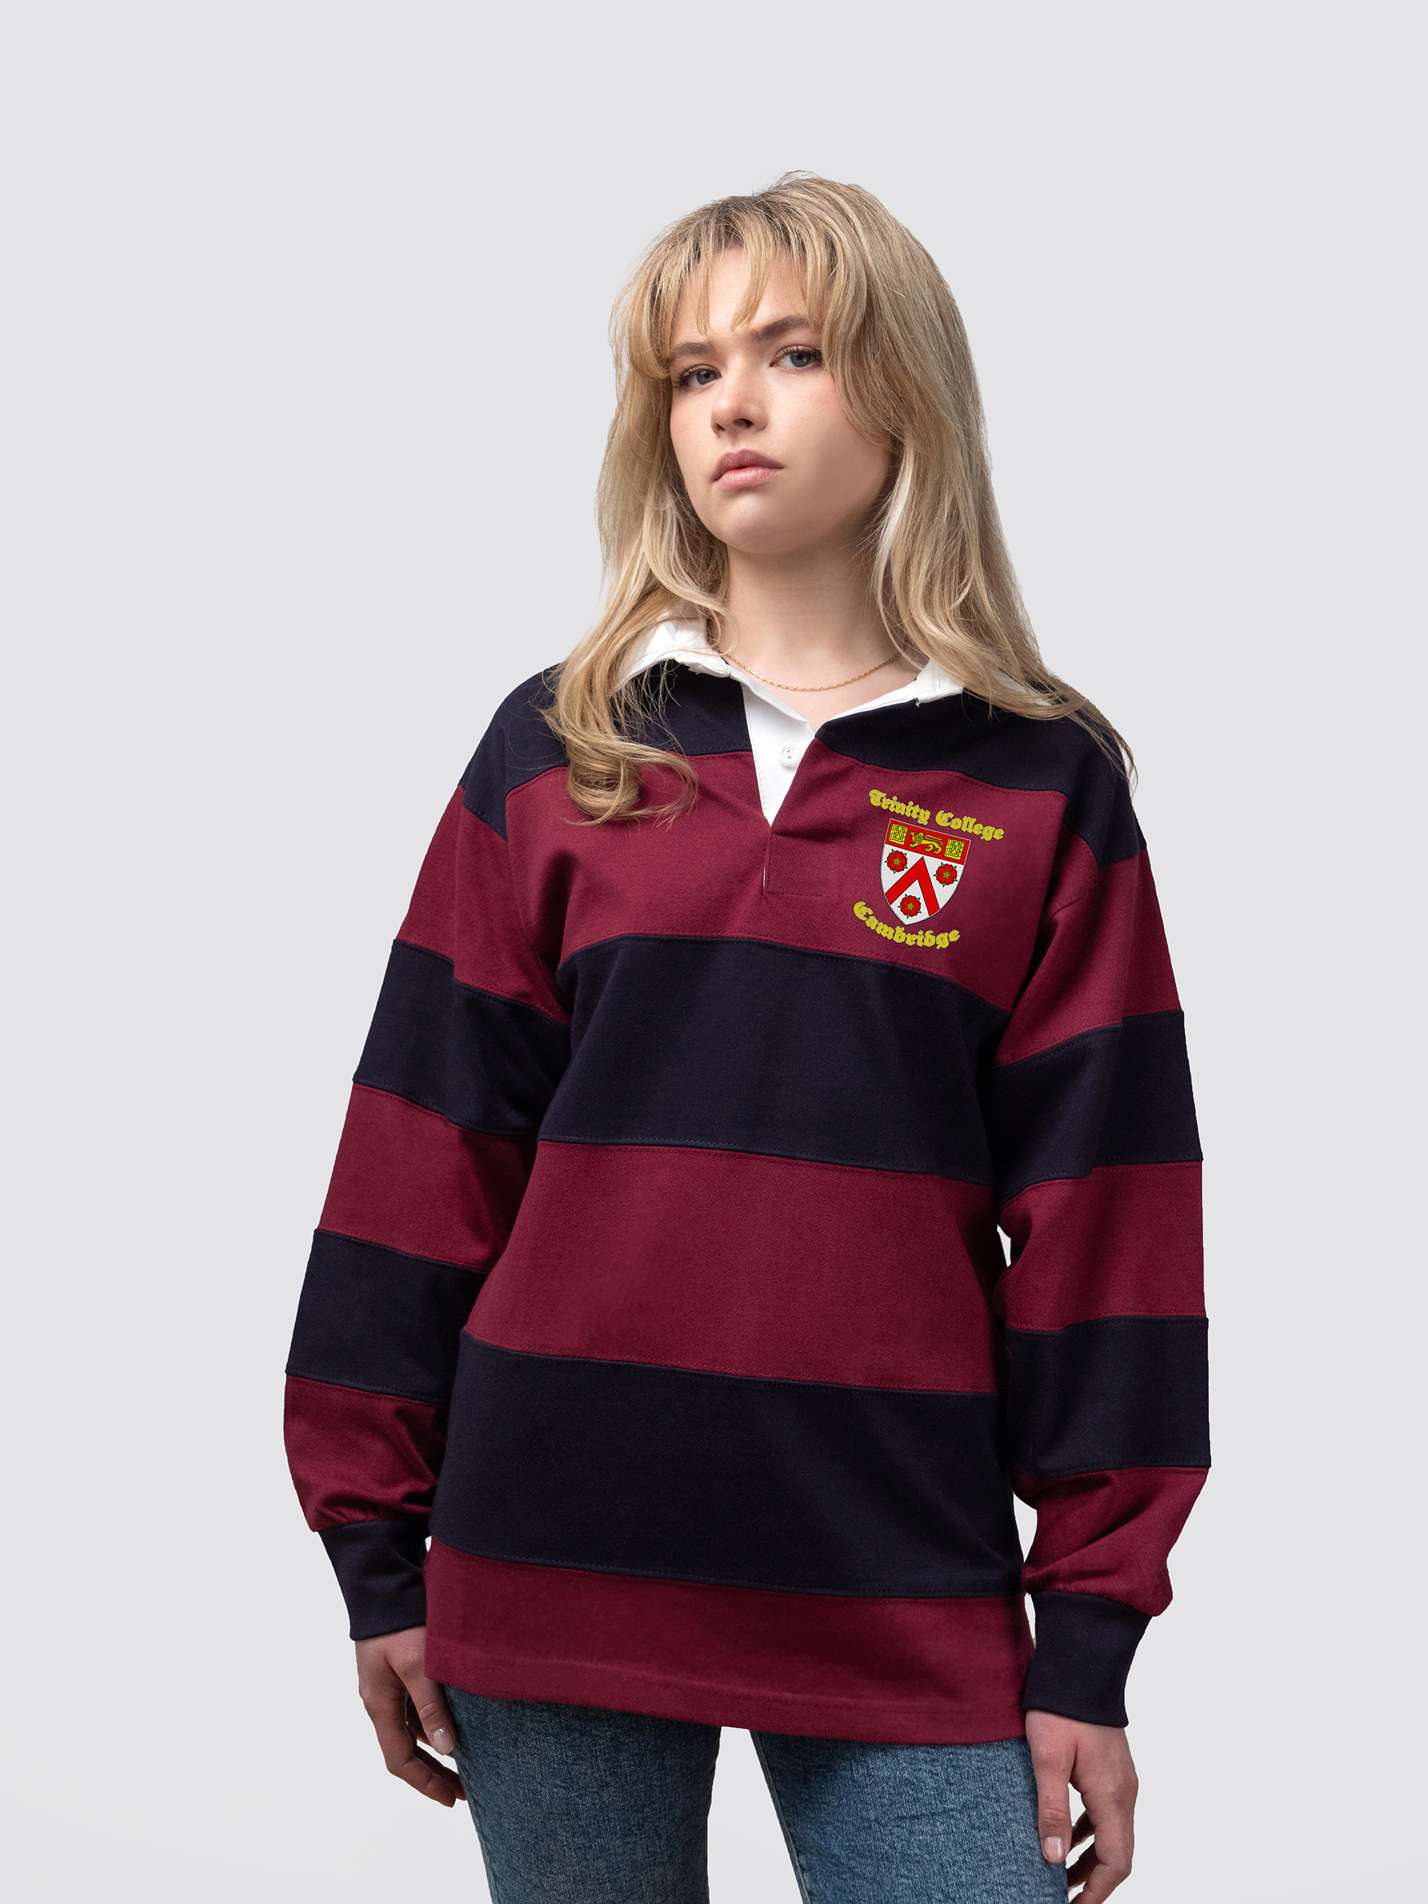 Trinity College rugby shirt, with burgundy and navy stripes